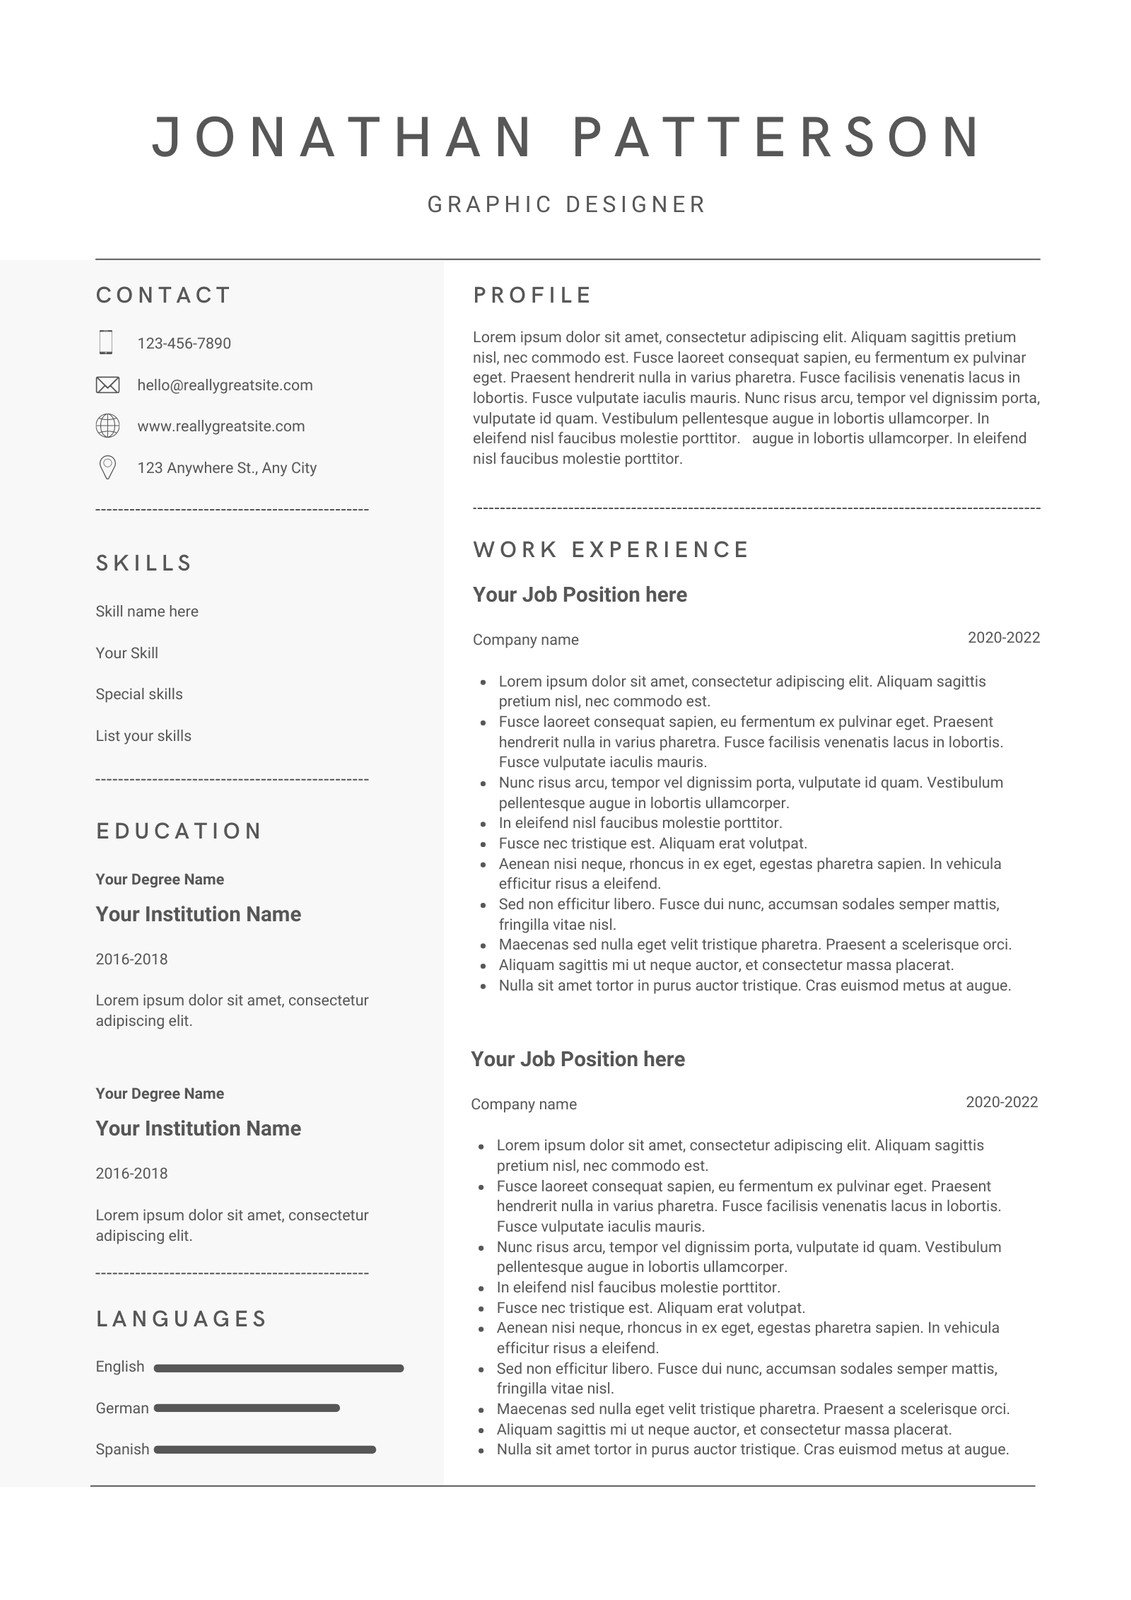 Free Professional Simple Resume Templates To Customize | Canva